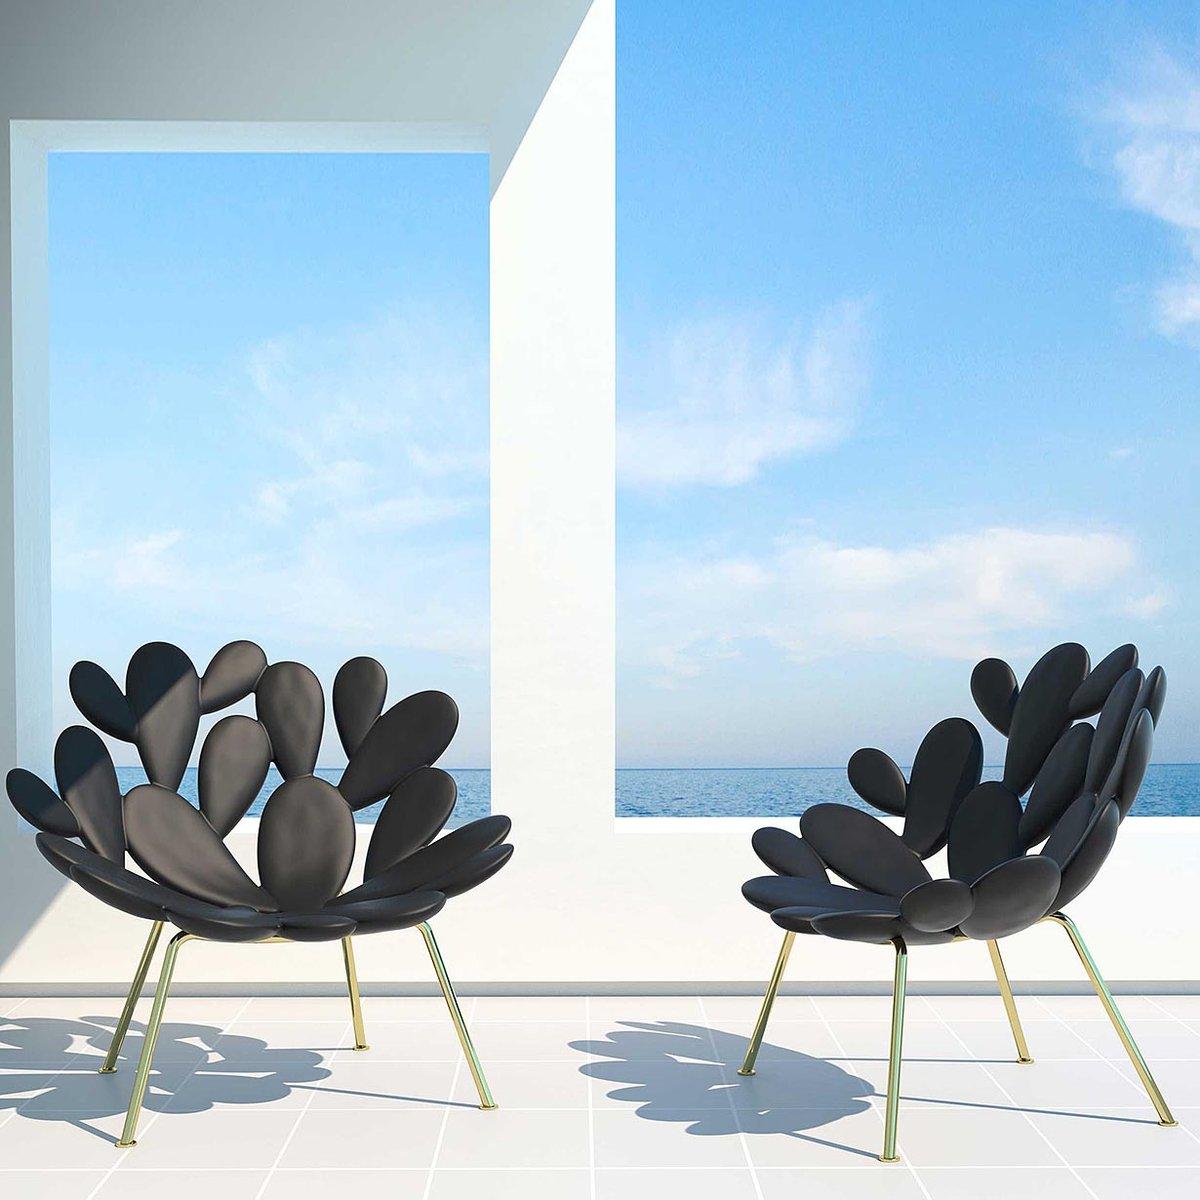 cactus chairs